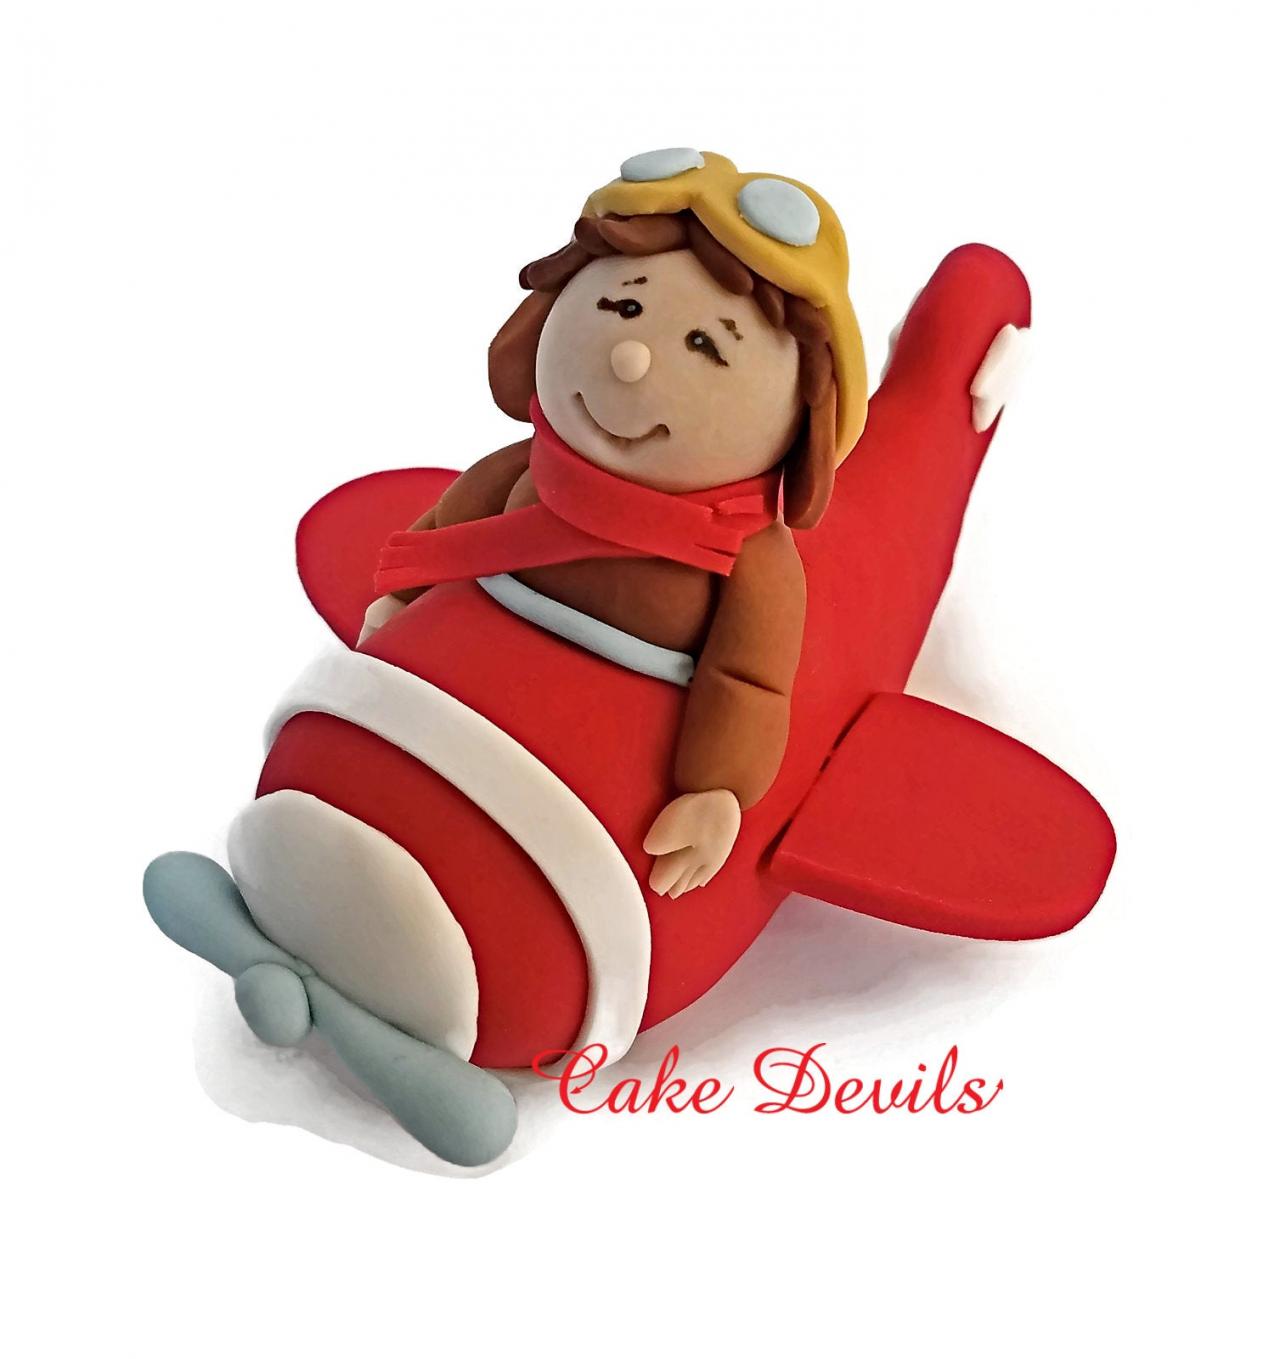 Boy In Plane Fondant Cake Topper, Coming In For A Landing Birthday Party Theme Decoration, Handmade Plane Cake Decoration, Handmade Edible